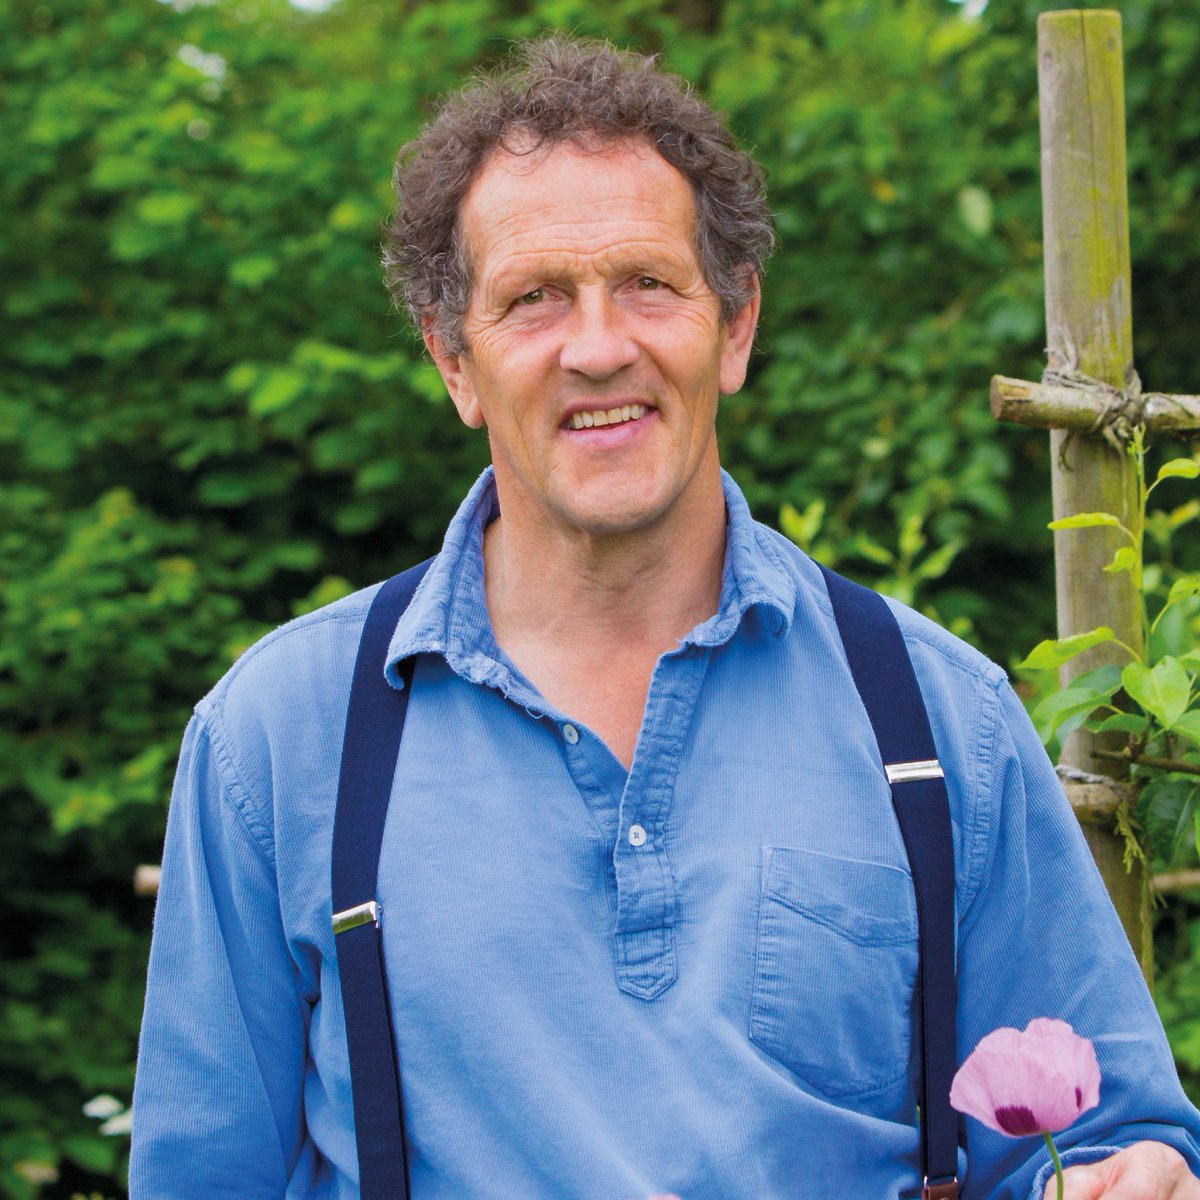 📣 Additional tickets released for Monty Don! Join BBC Gardeners' World presenter and gardening writer, Monty Don, as he shares his passion for gardens and the unique role they play in human inspiration and wellbeing. Book your tickets now 🎟 - bit.ly/3sITh4Q